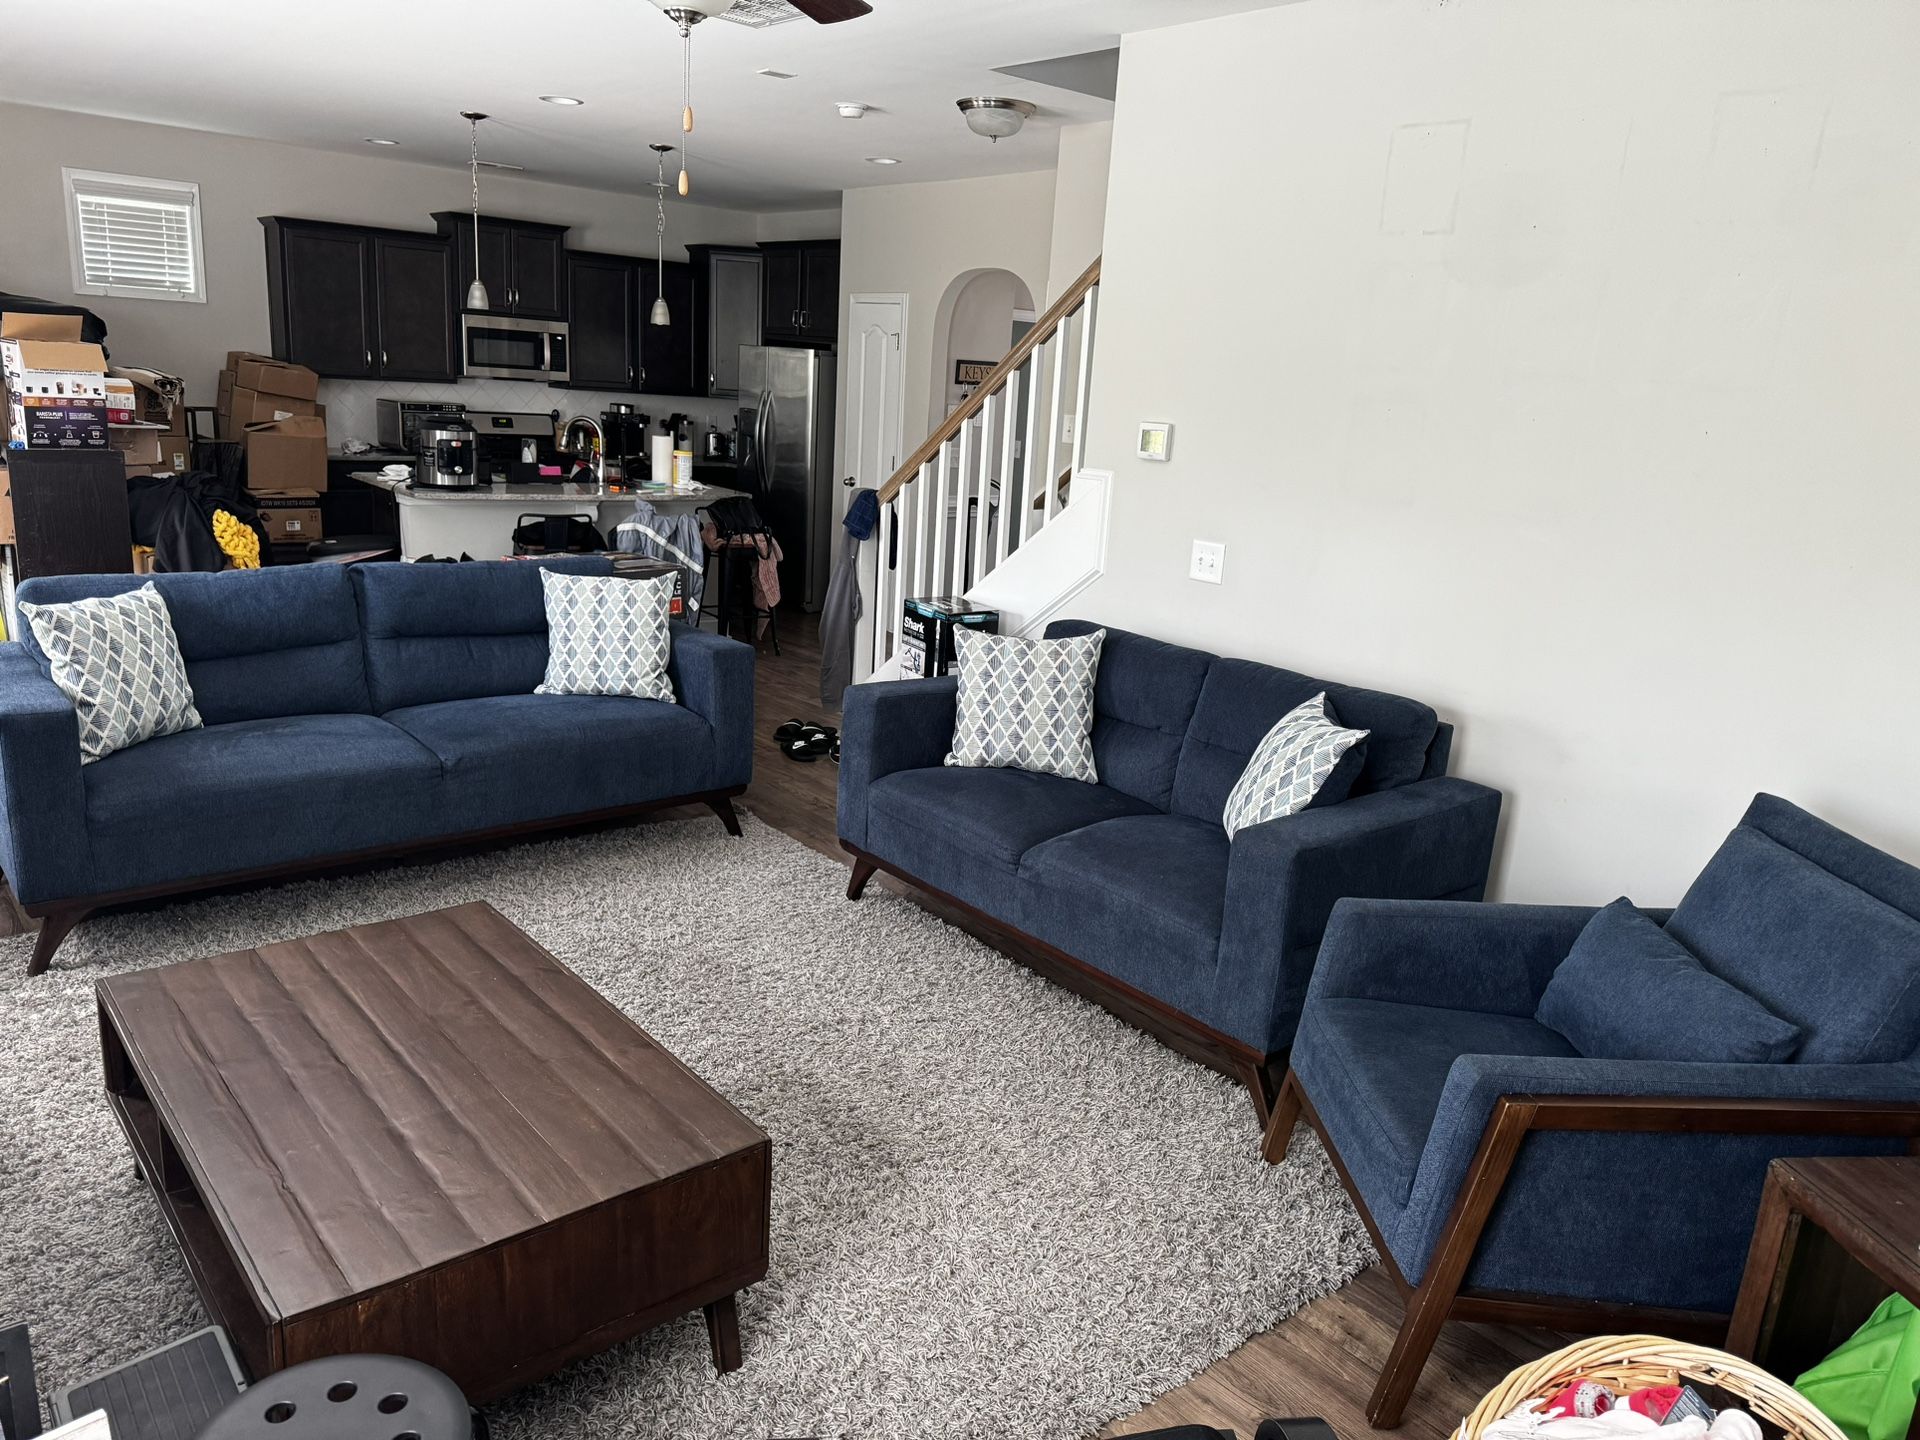 Luxurious Living: Like New Couch, loveseat, and chair bundle - Must See!